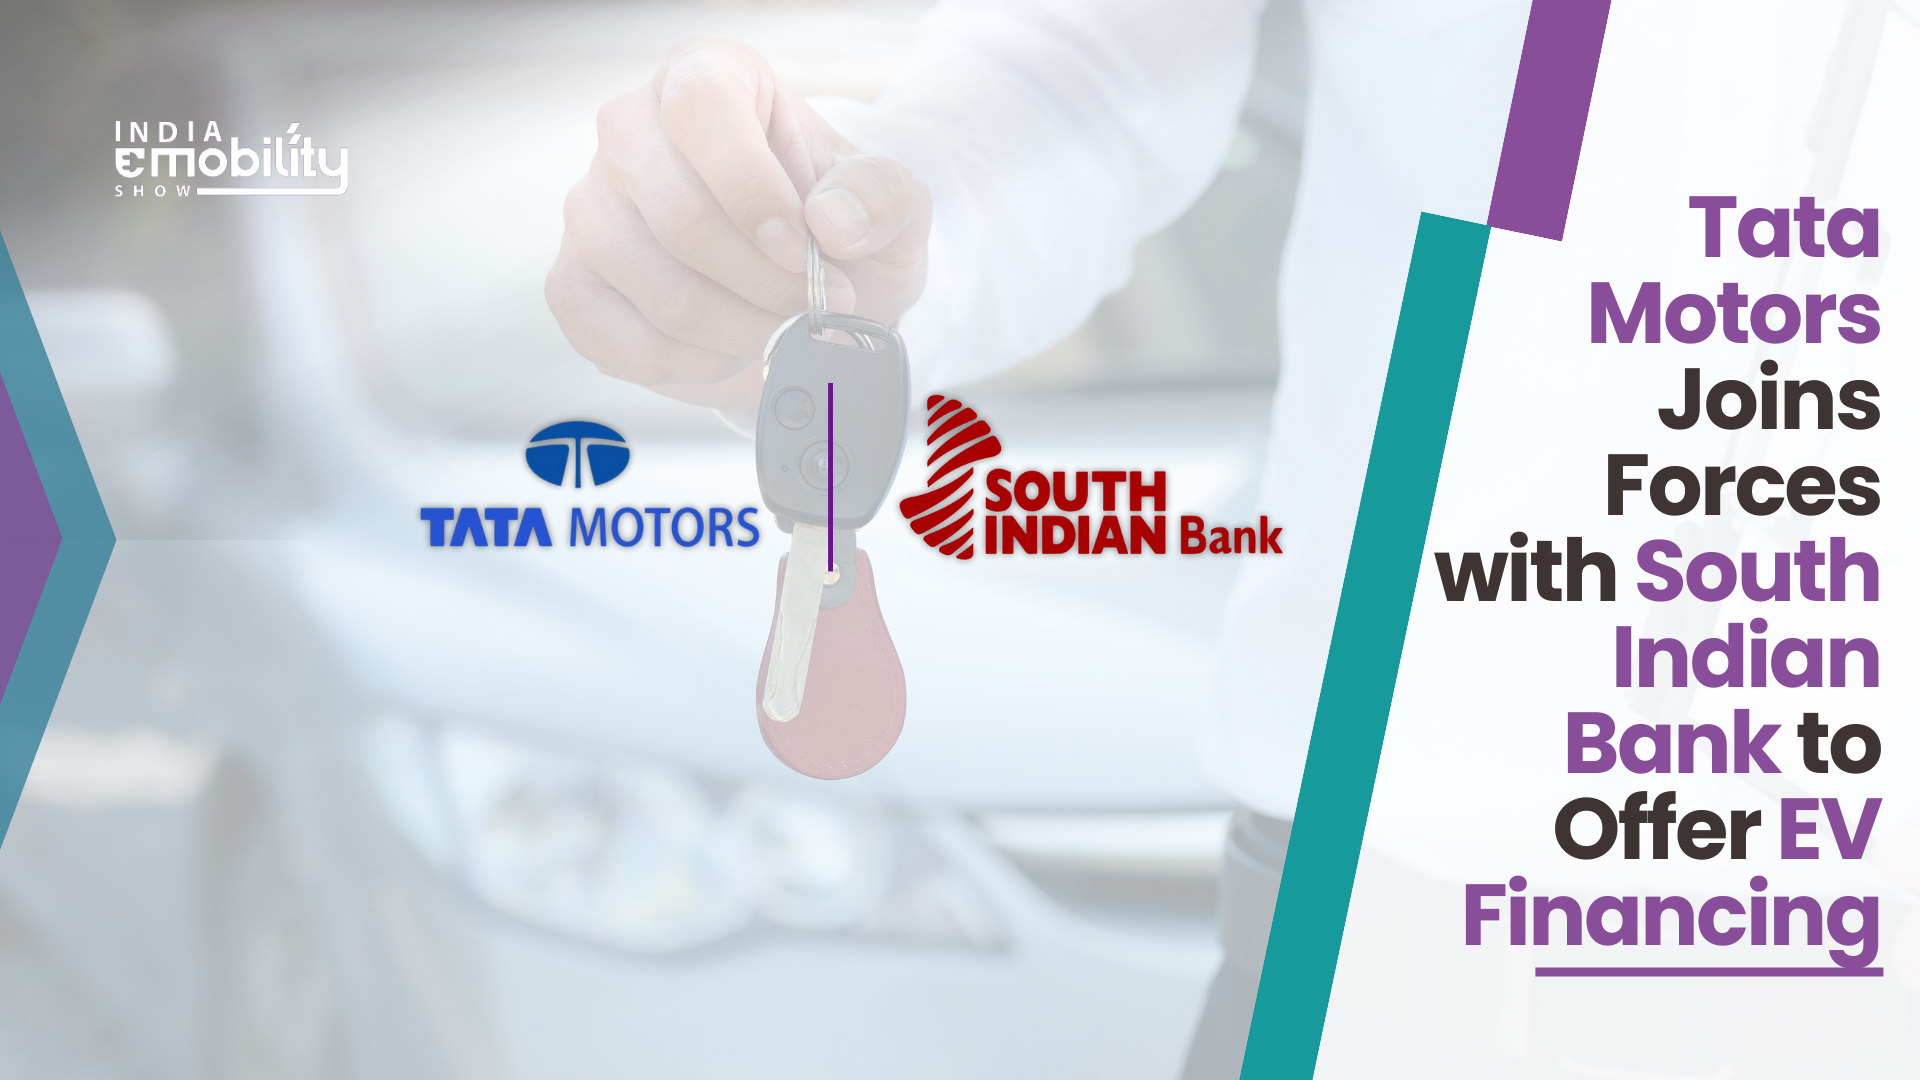 Tata Motors Joins Forces with South Indian Bank to Offer EV Financing